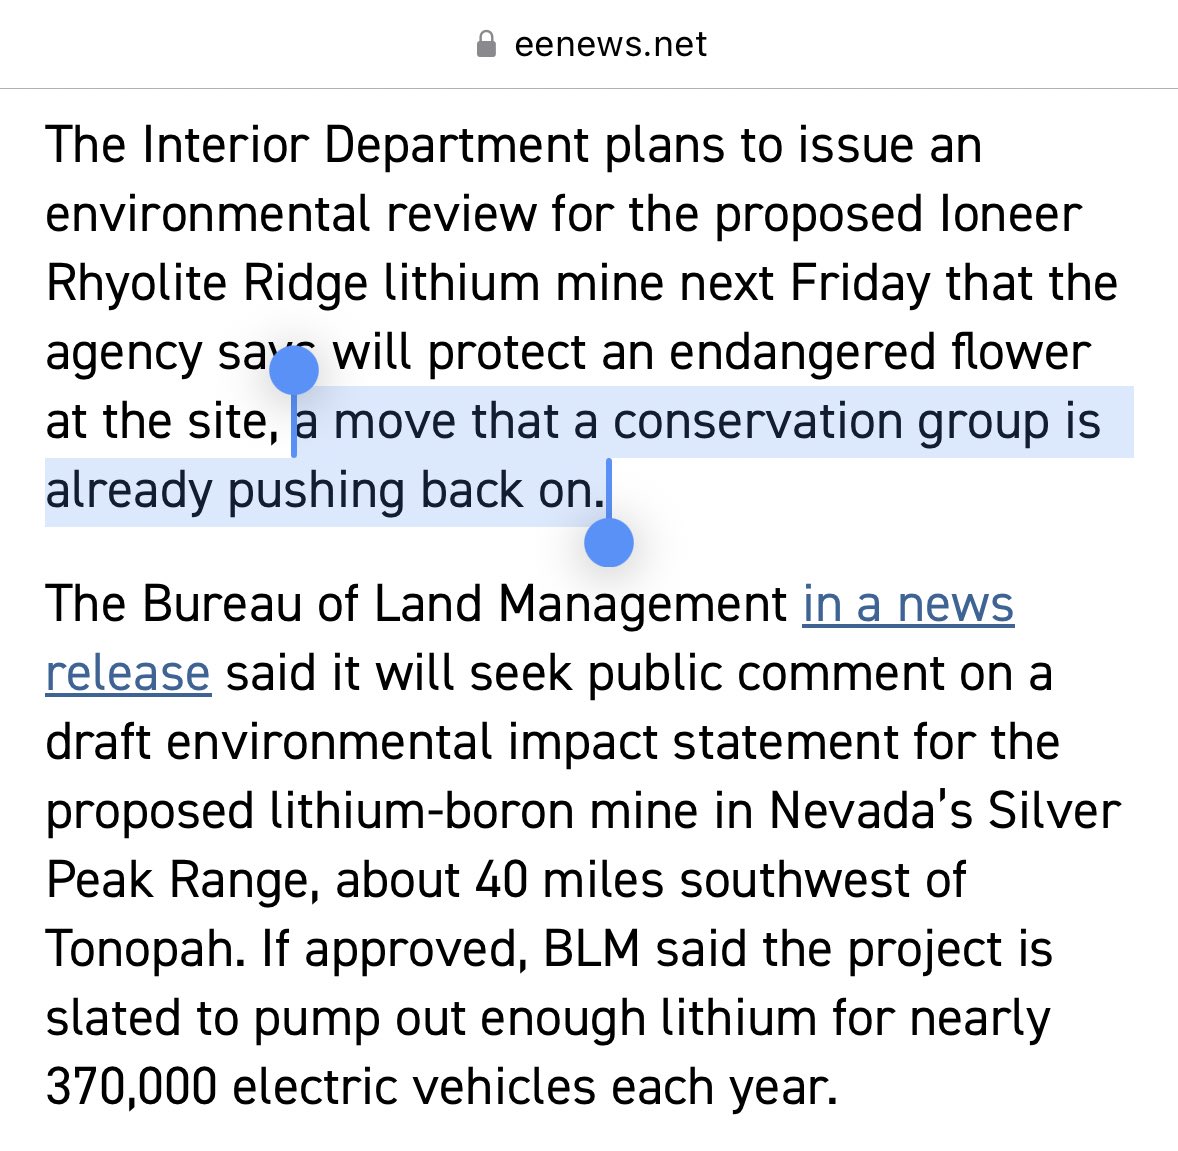 You cannot love EVs and hate lithium mines. If conservation groups are unwilling to consider tradeoffs, then policymakers should ignore them.